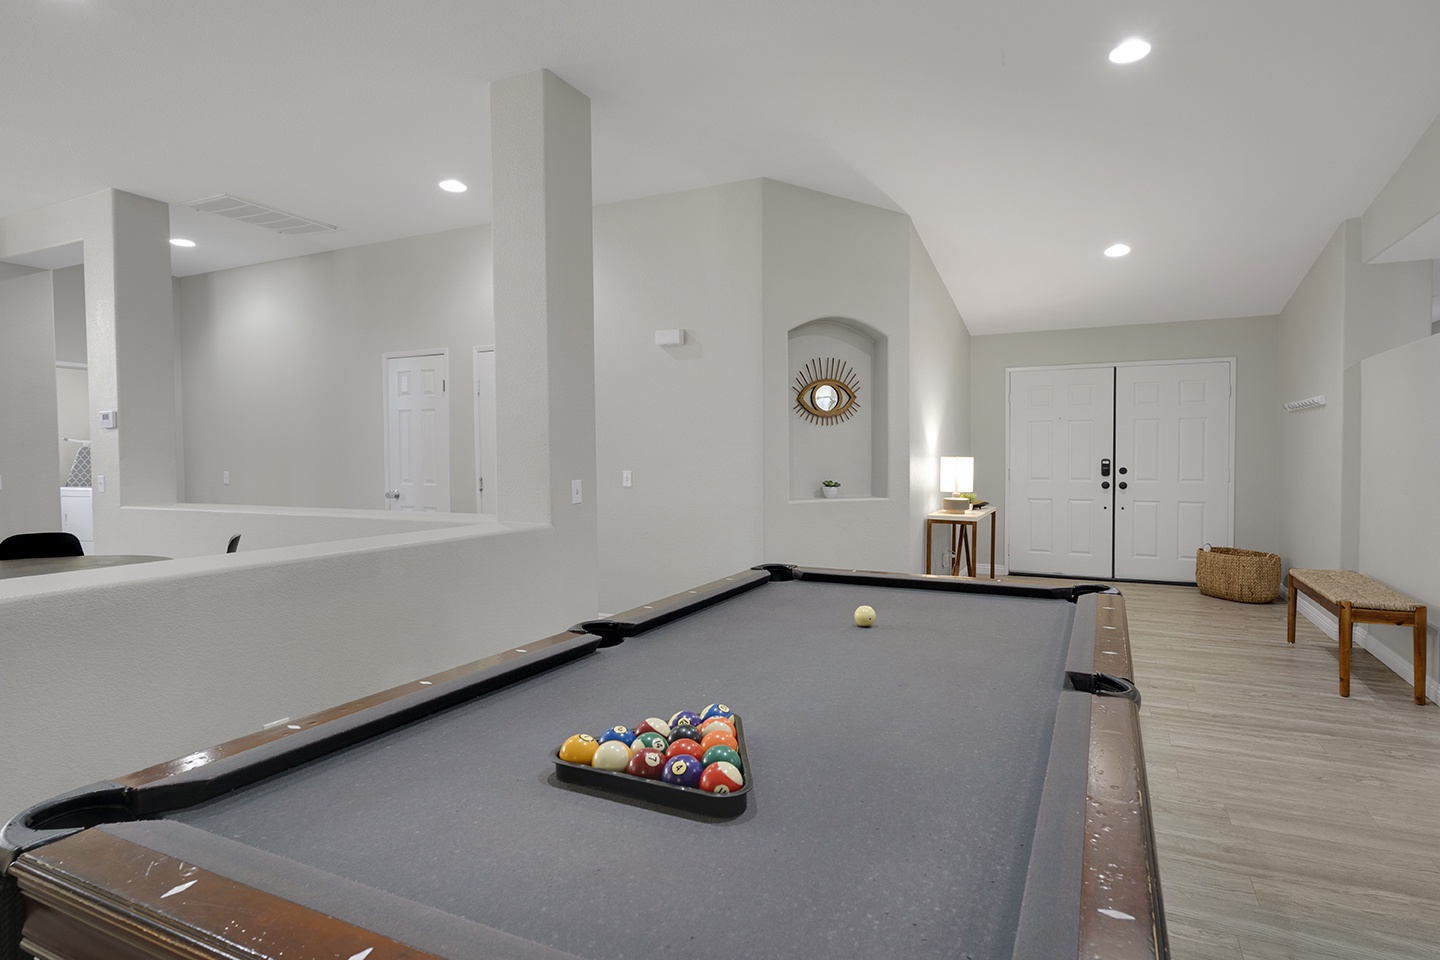 Pool table for guest use